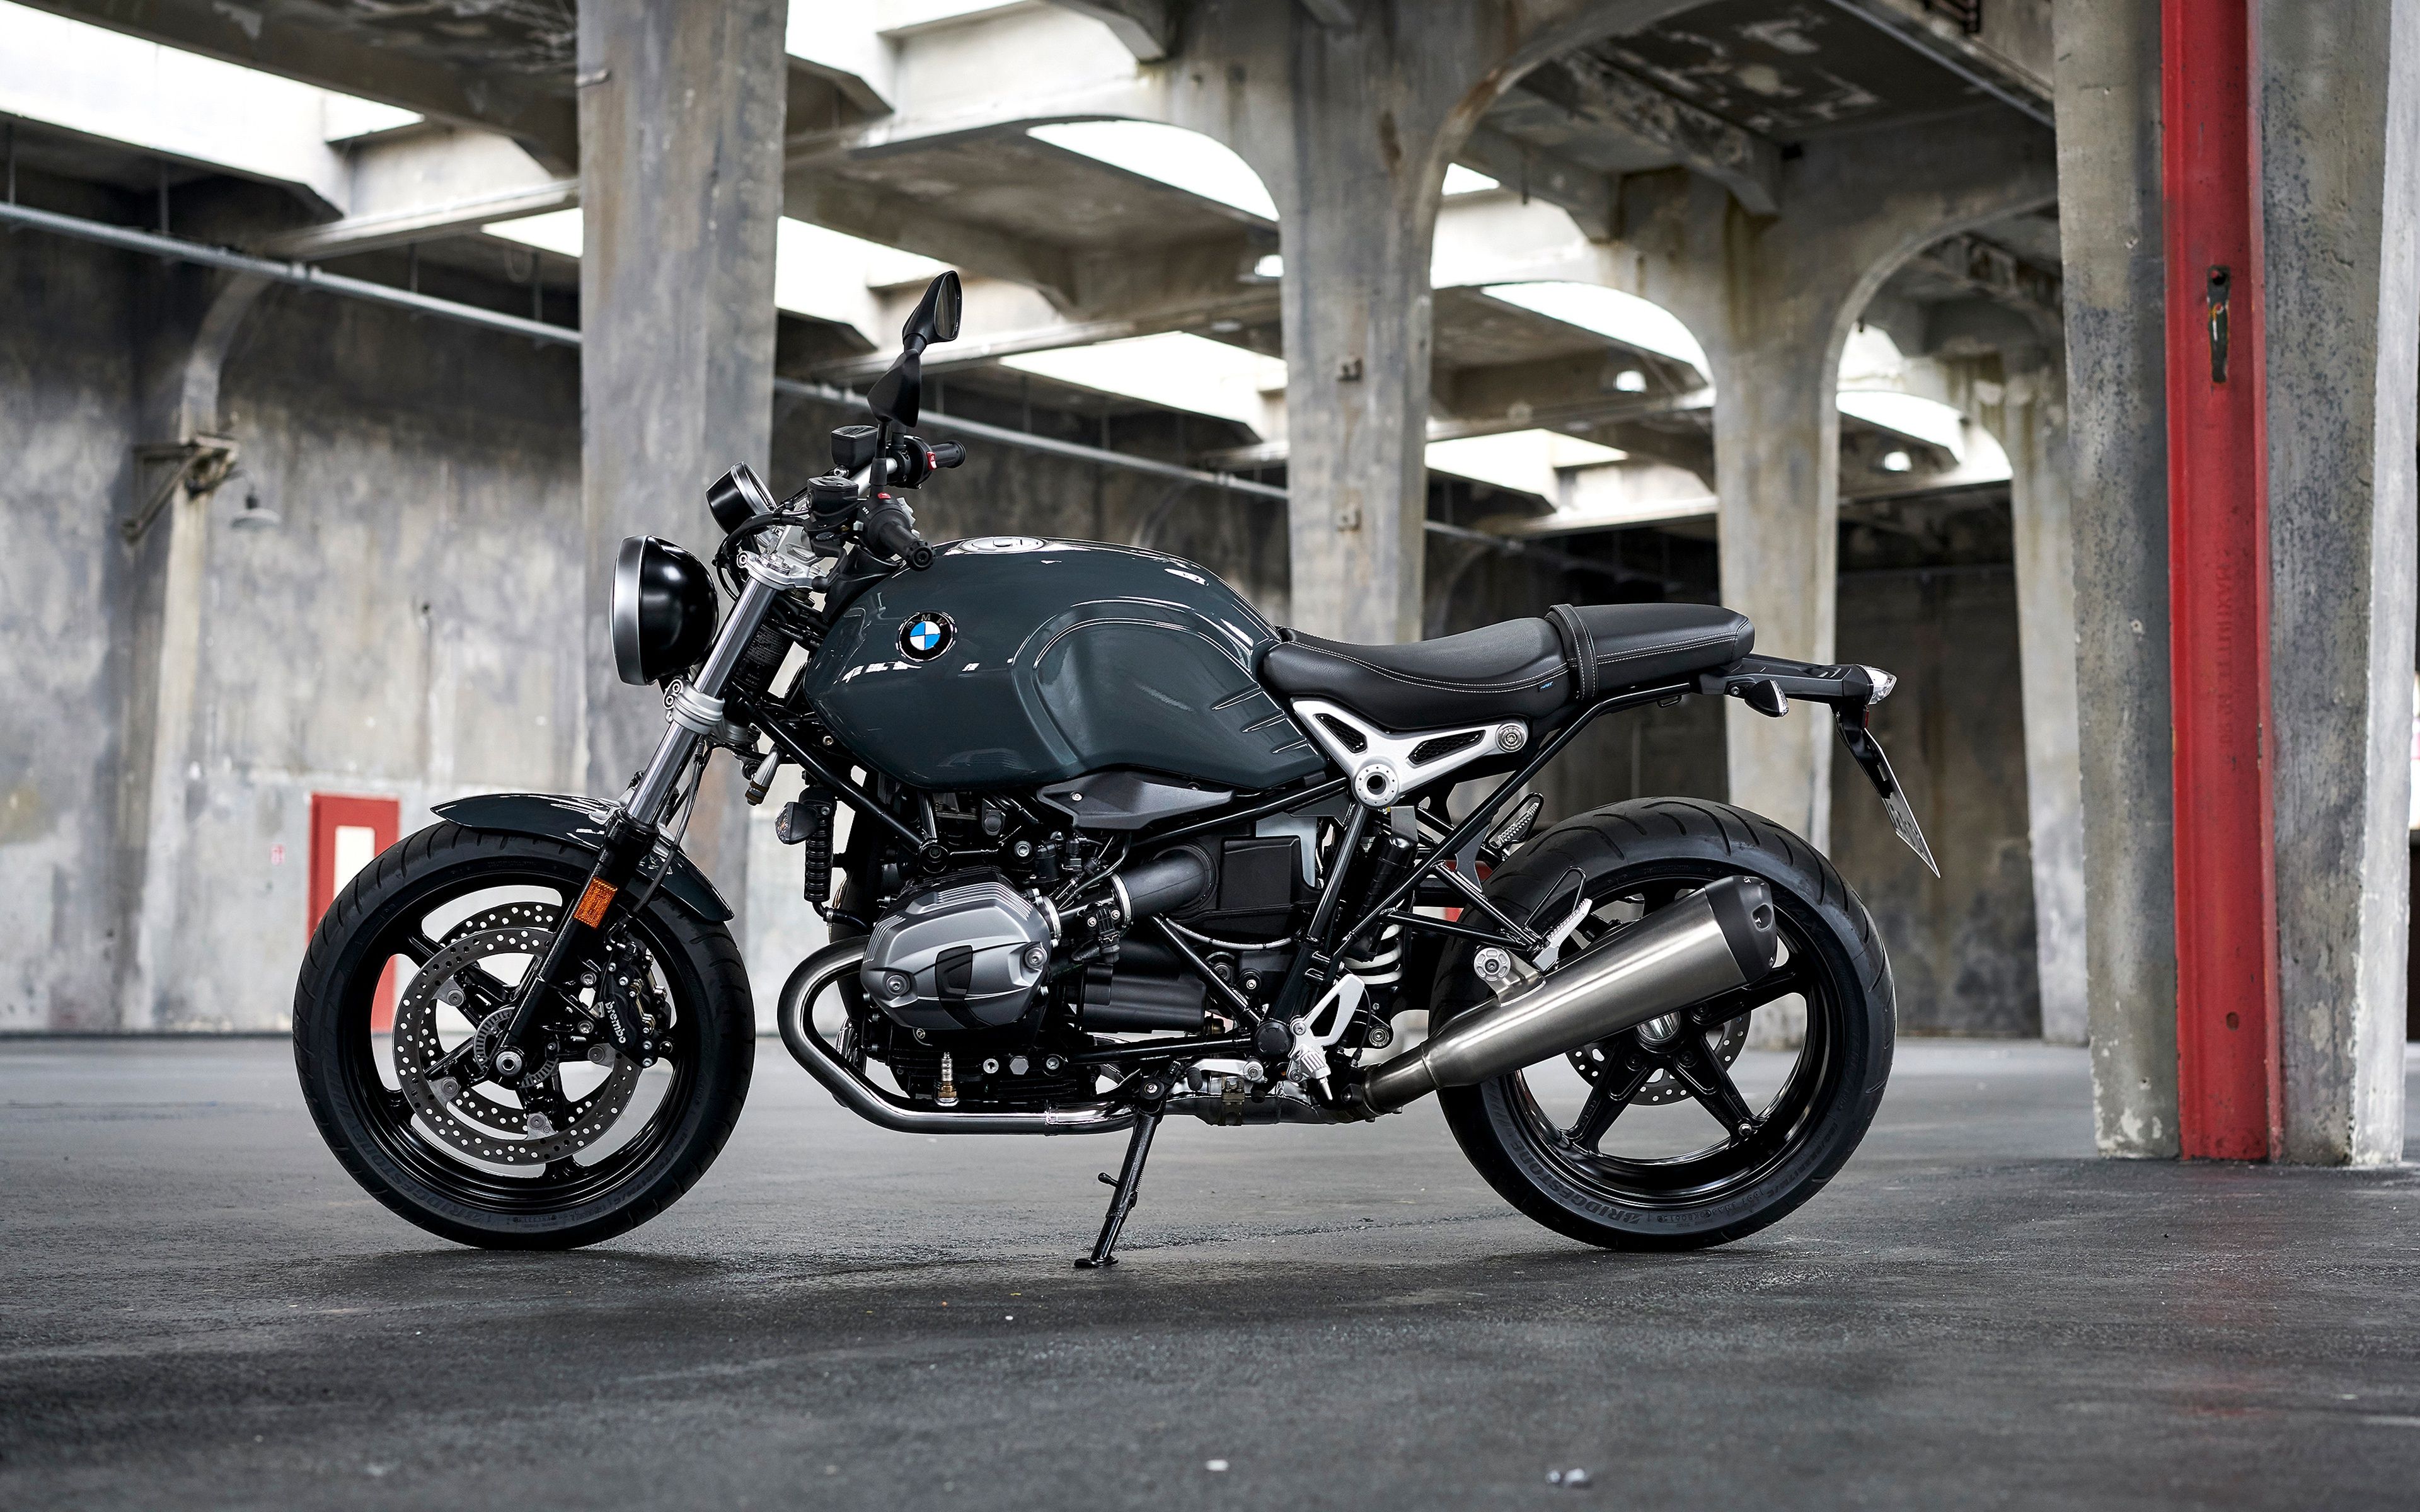 Wallpaper of BMW, BMW R nineT, Motorcycle background & HD image